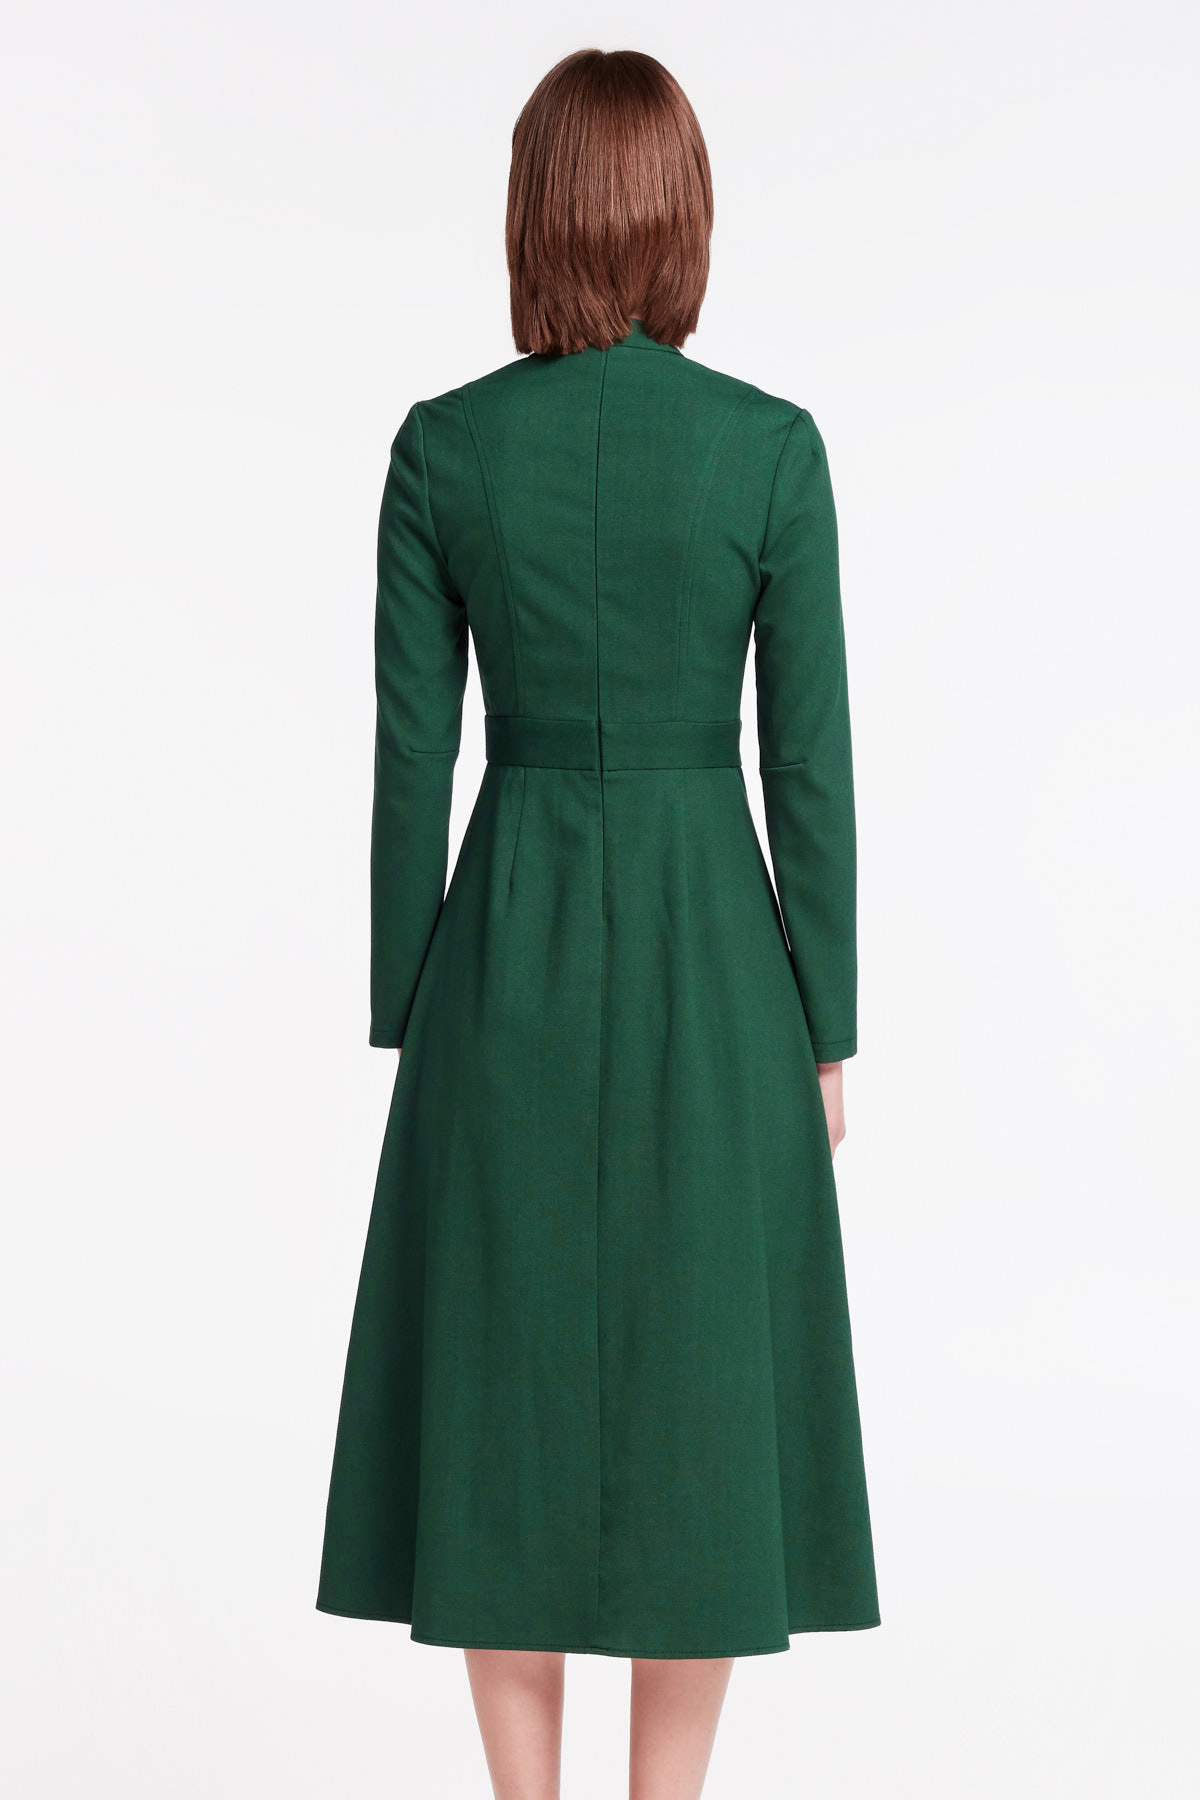 Green dress with a bow, photo 11